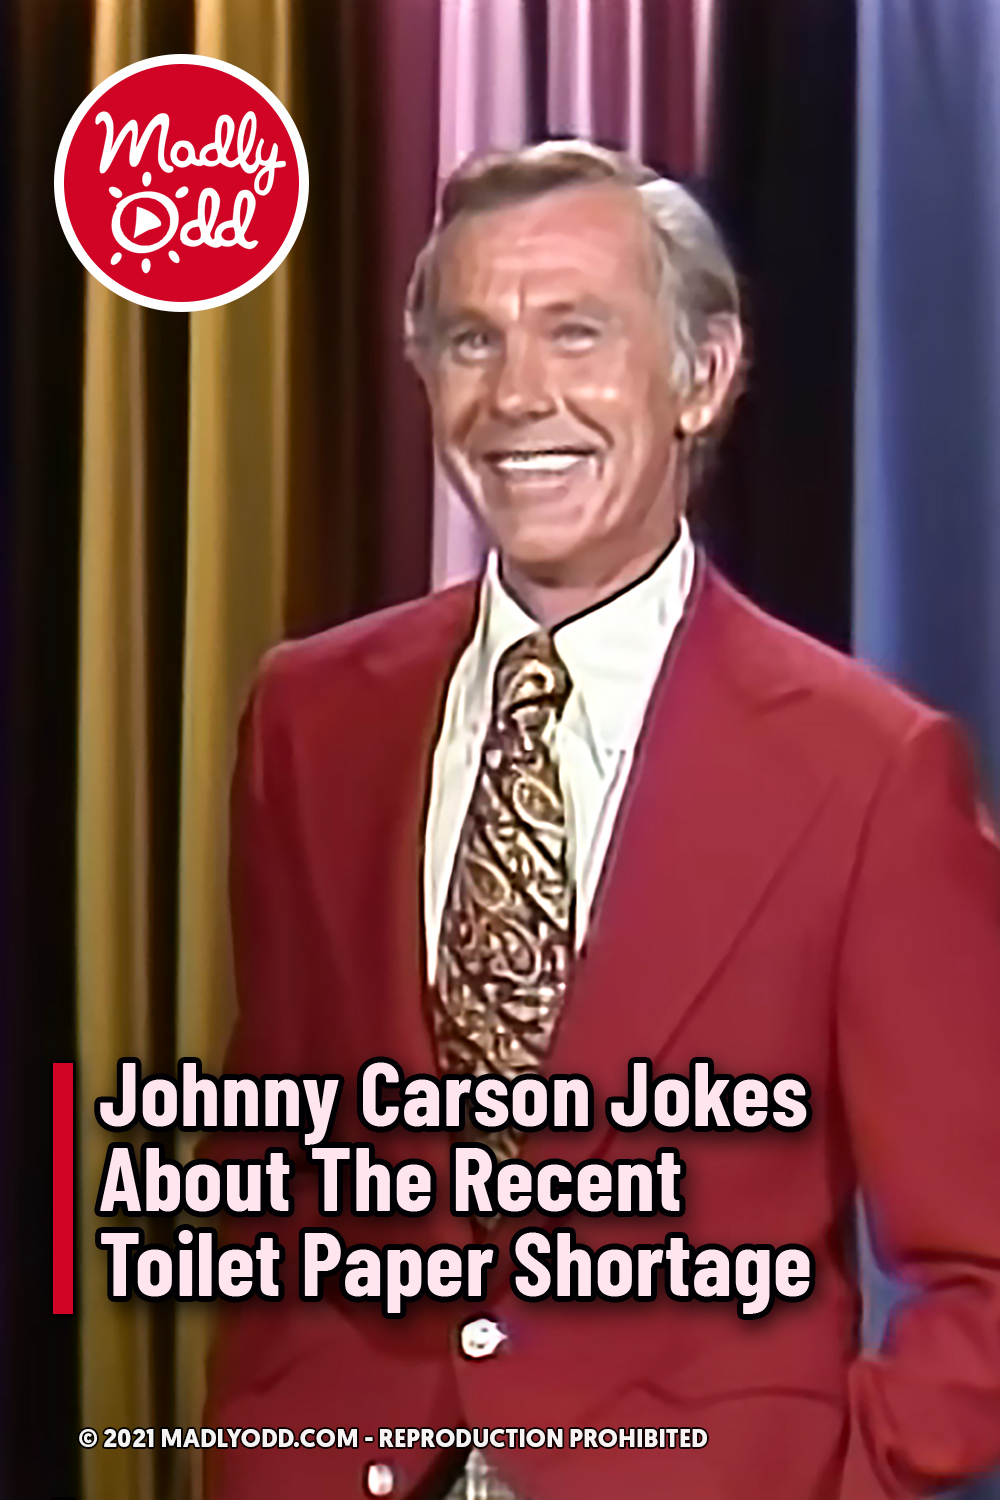 Johnny Carson Jokes About The Recent Toilet Paper Shortage